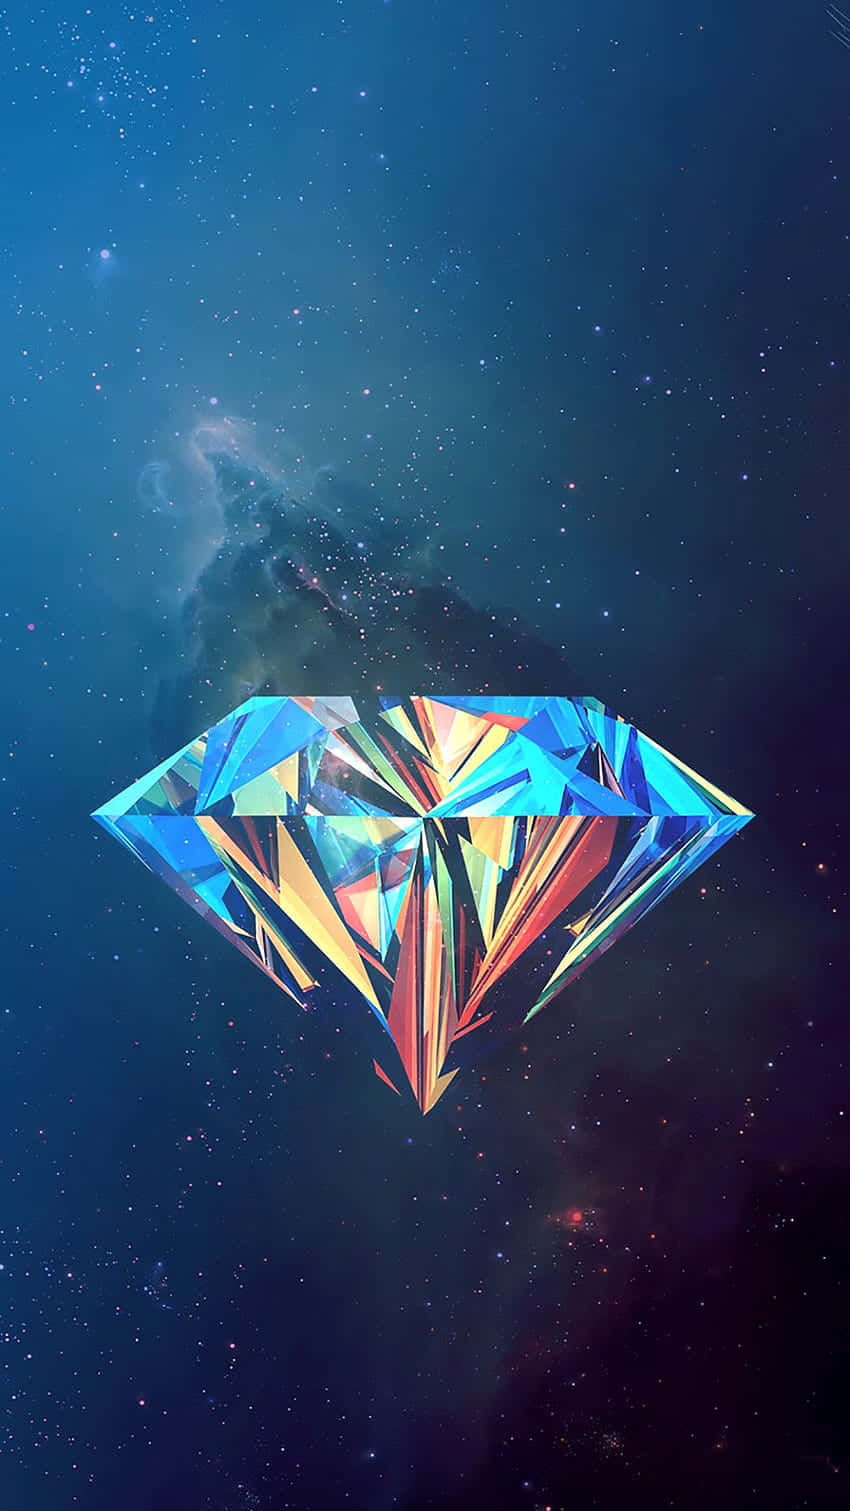 Get your shine on with these beautiful Galaxy Diamonds Wallpaper